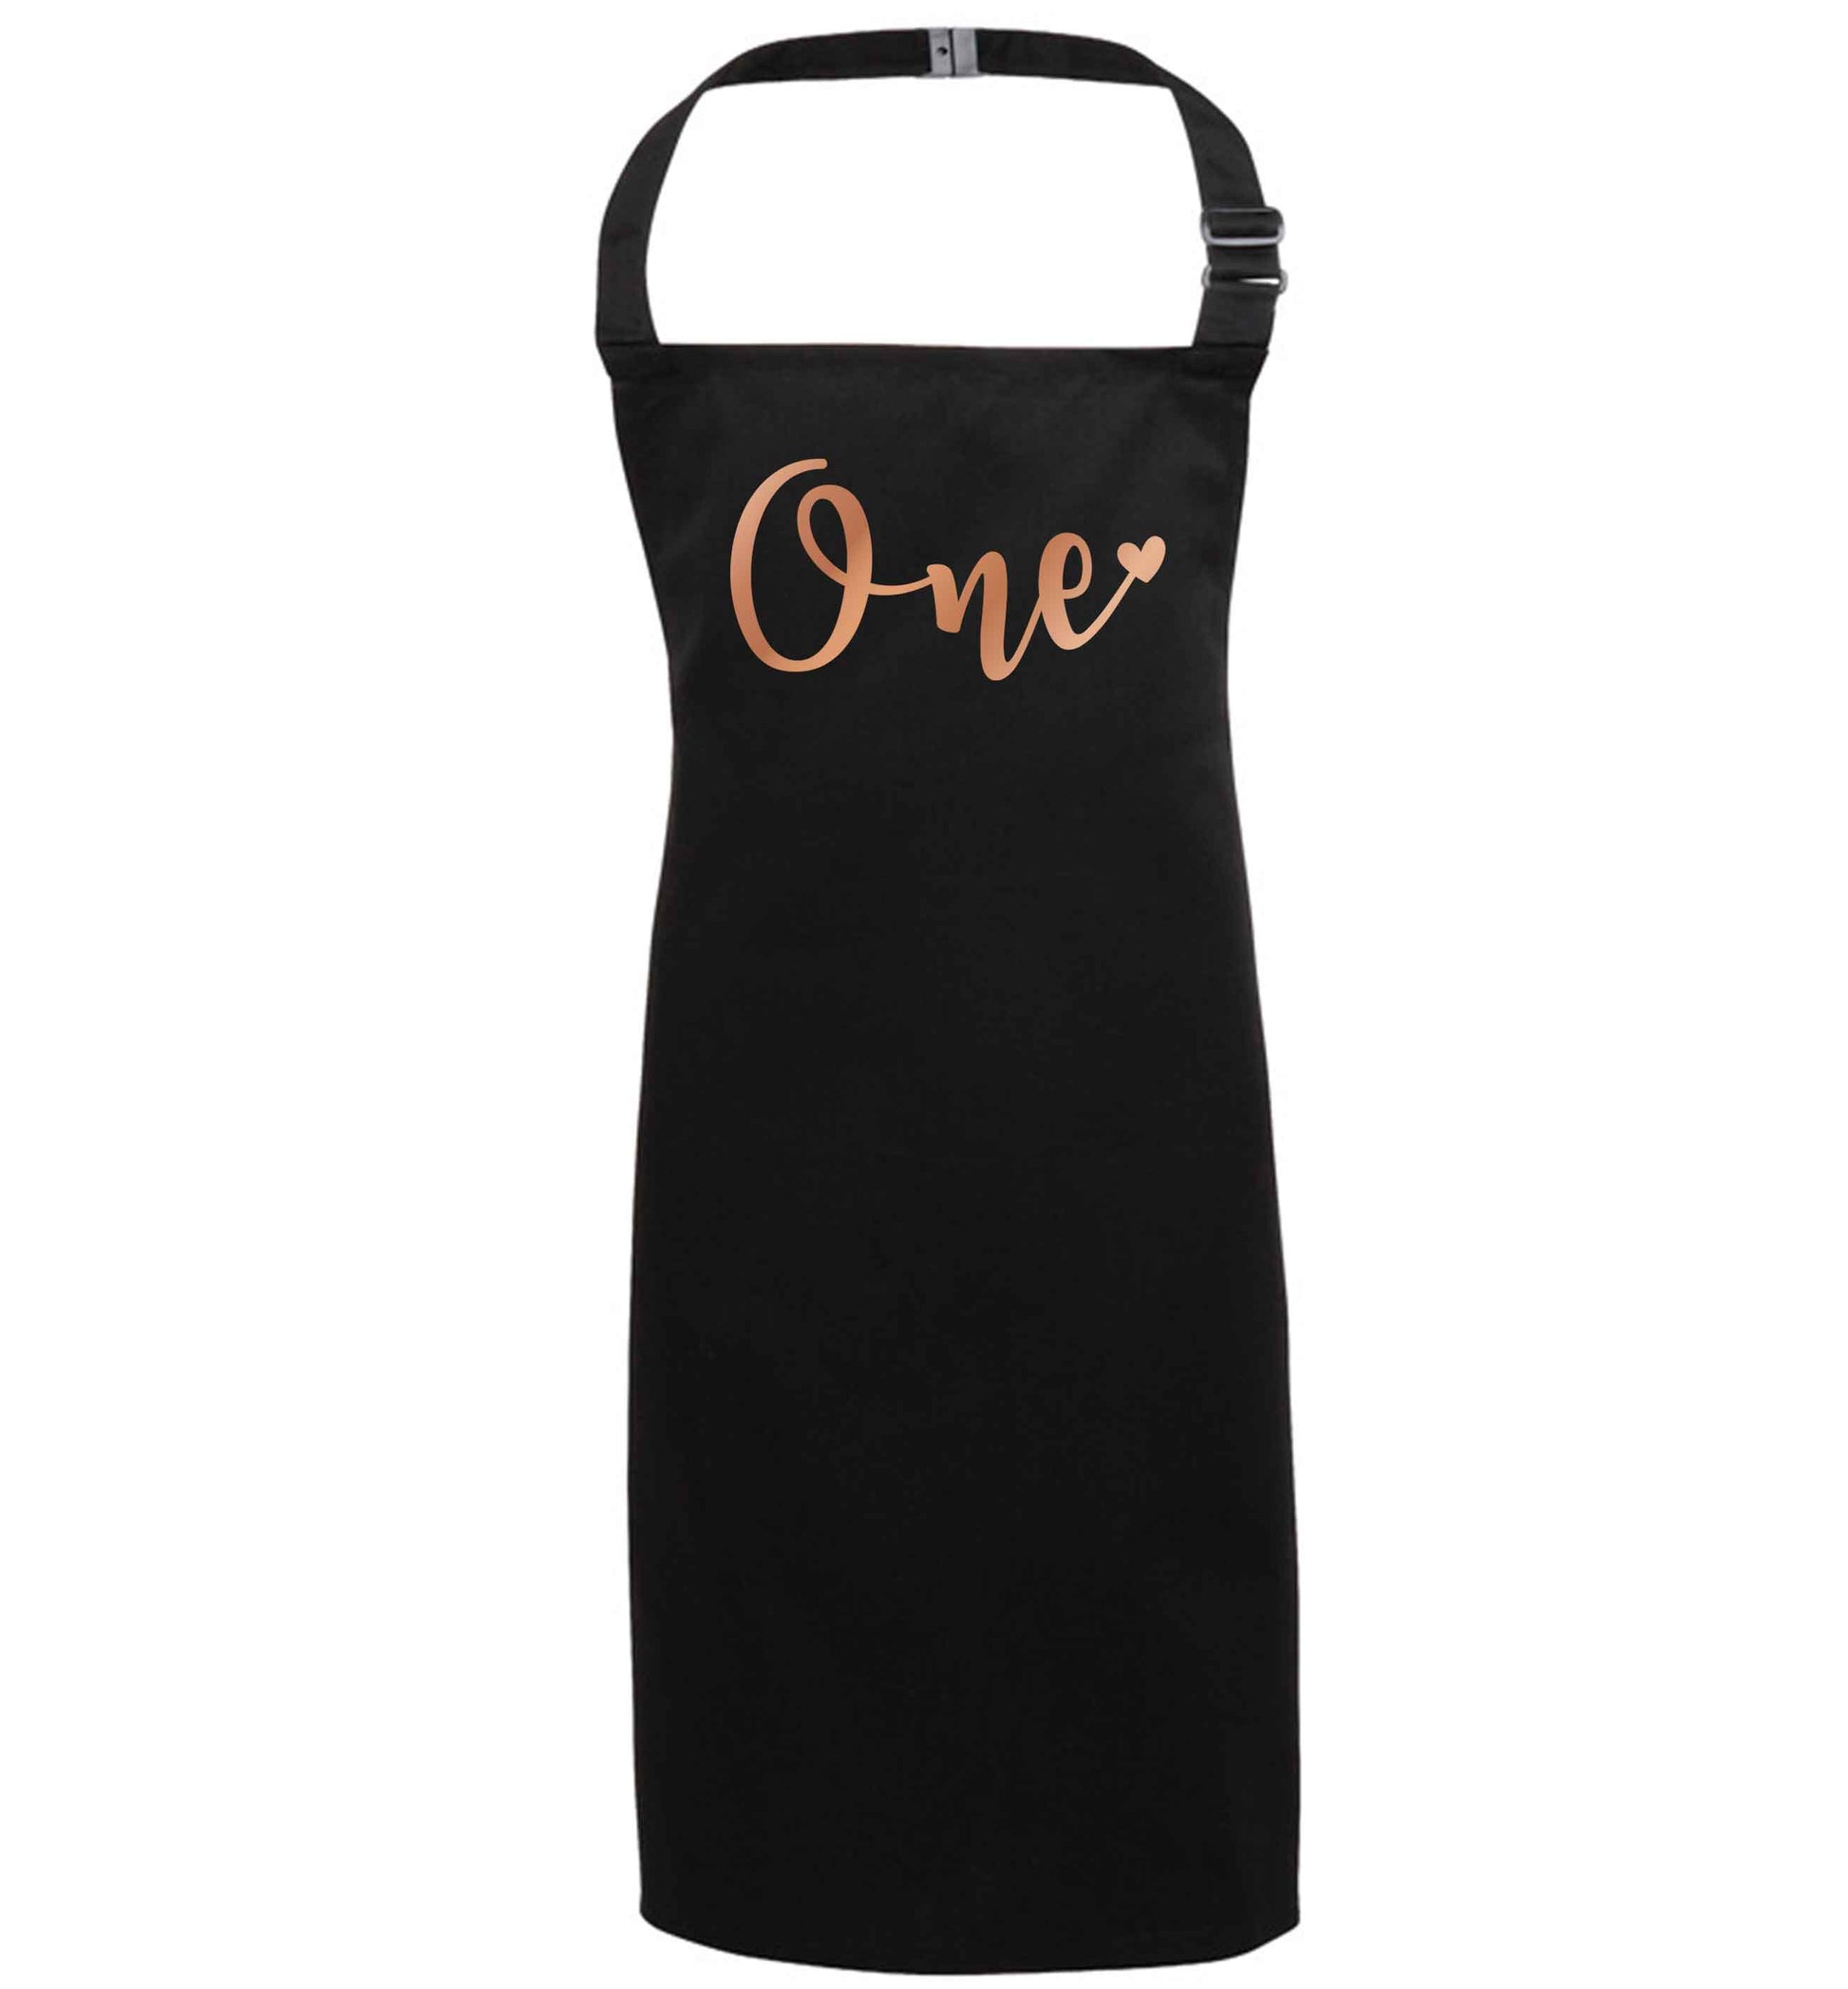 Rose Gold One black apron 7-10 years